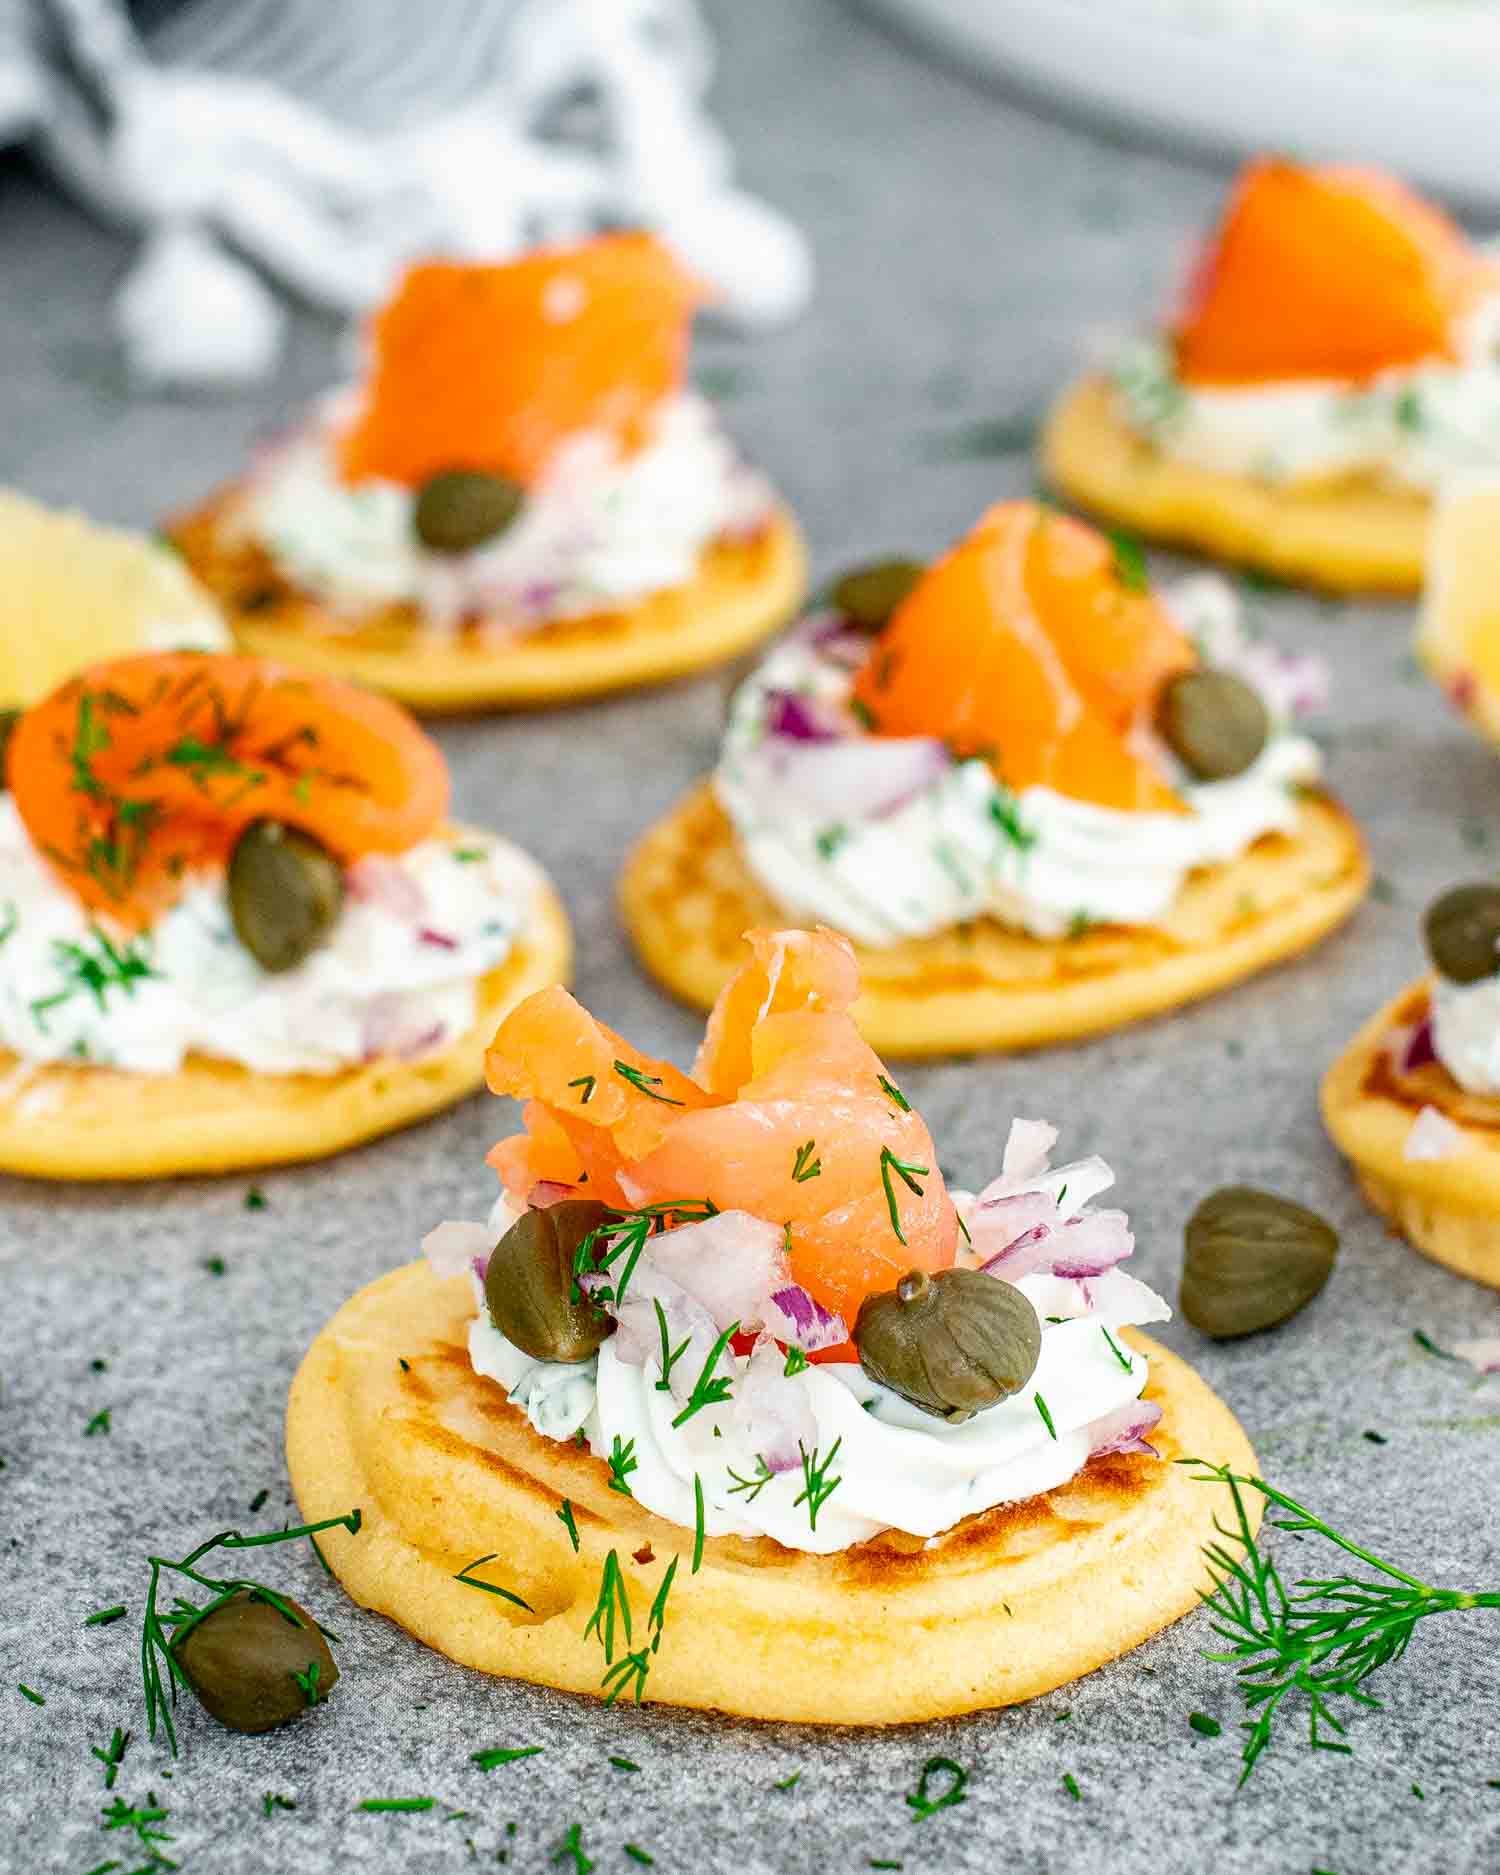 freshly made smoked salmon blinis on a gray plate garnished with lemon wedges.